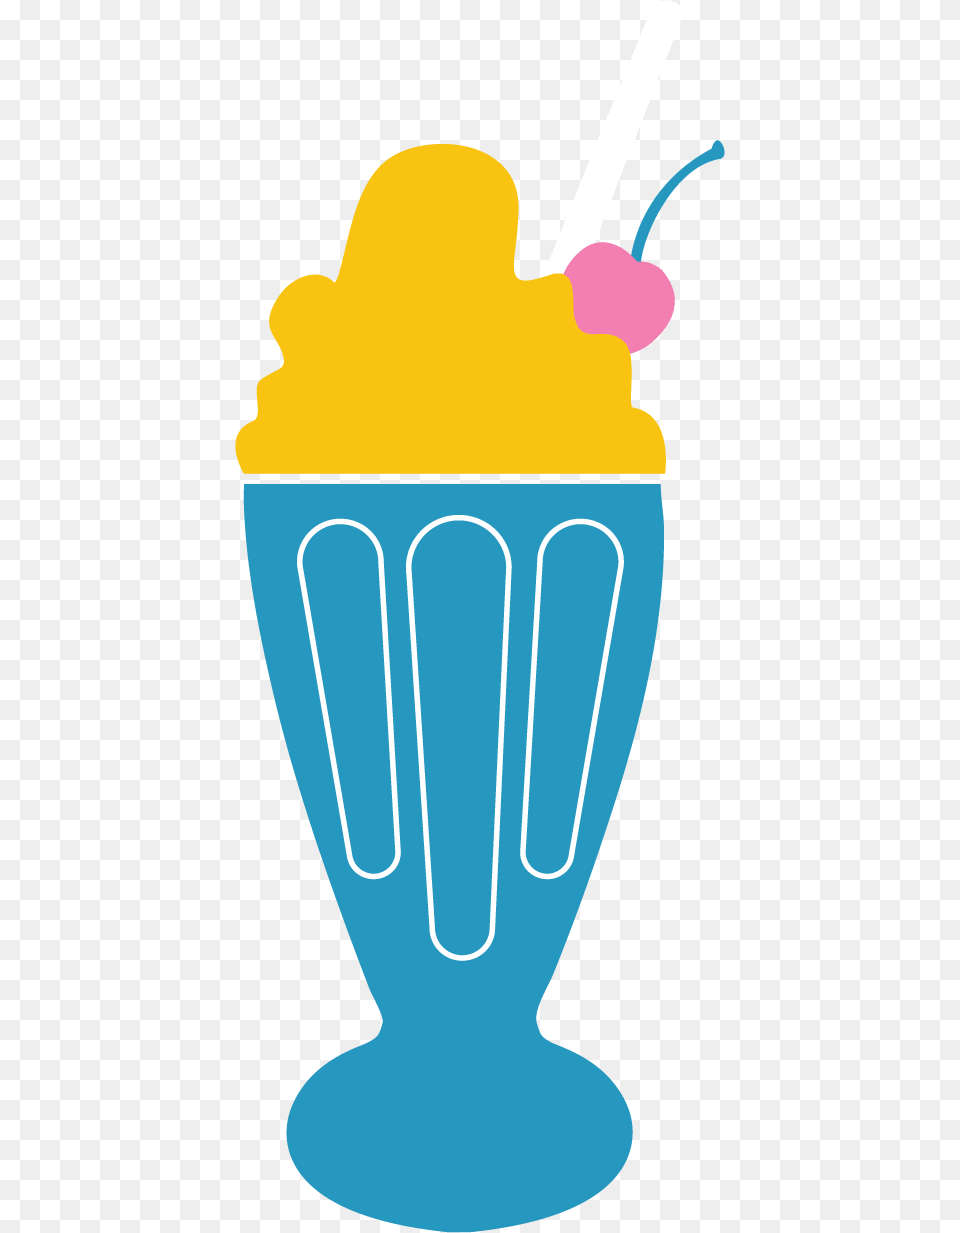 Check Out Our Shakes, Cream, Dessert, Food, Ice Cream Png Image